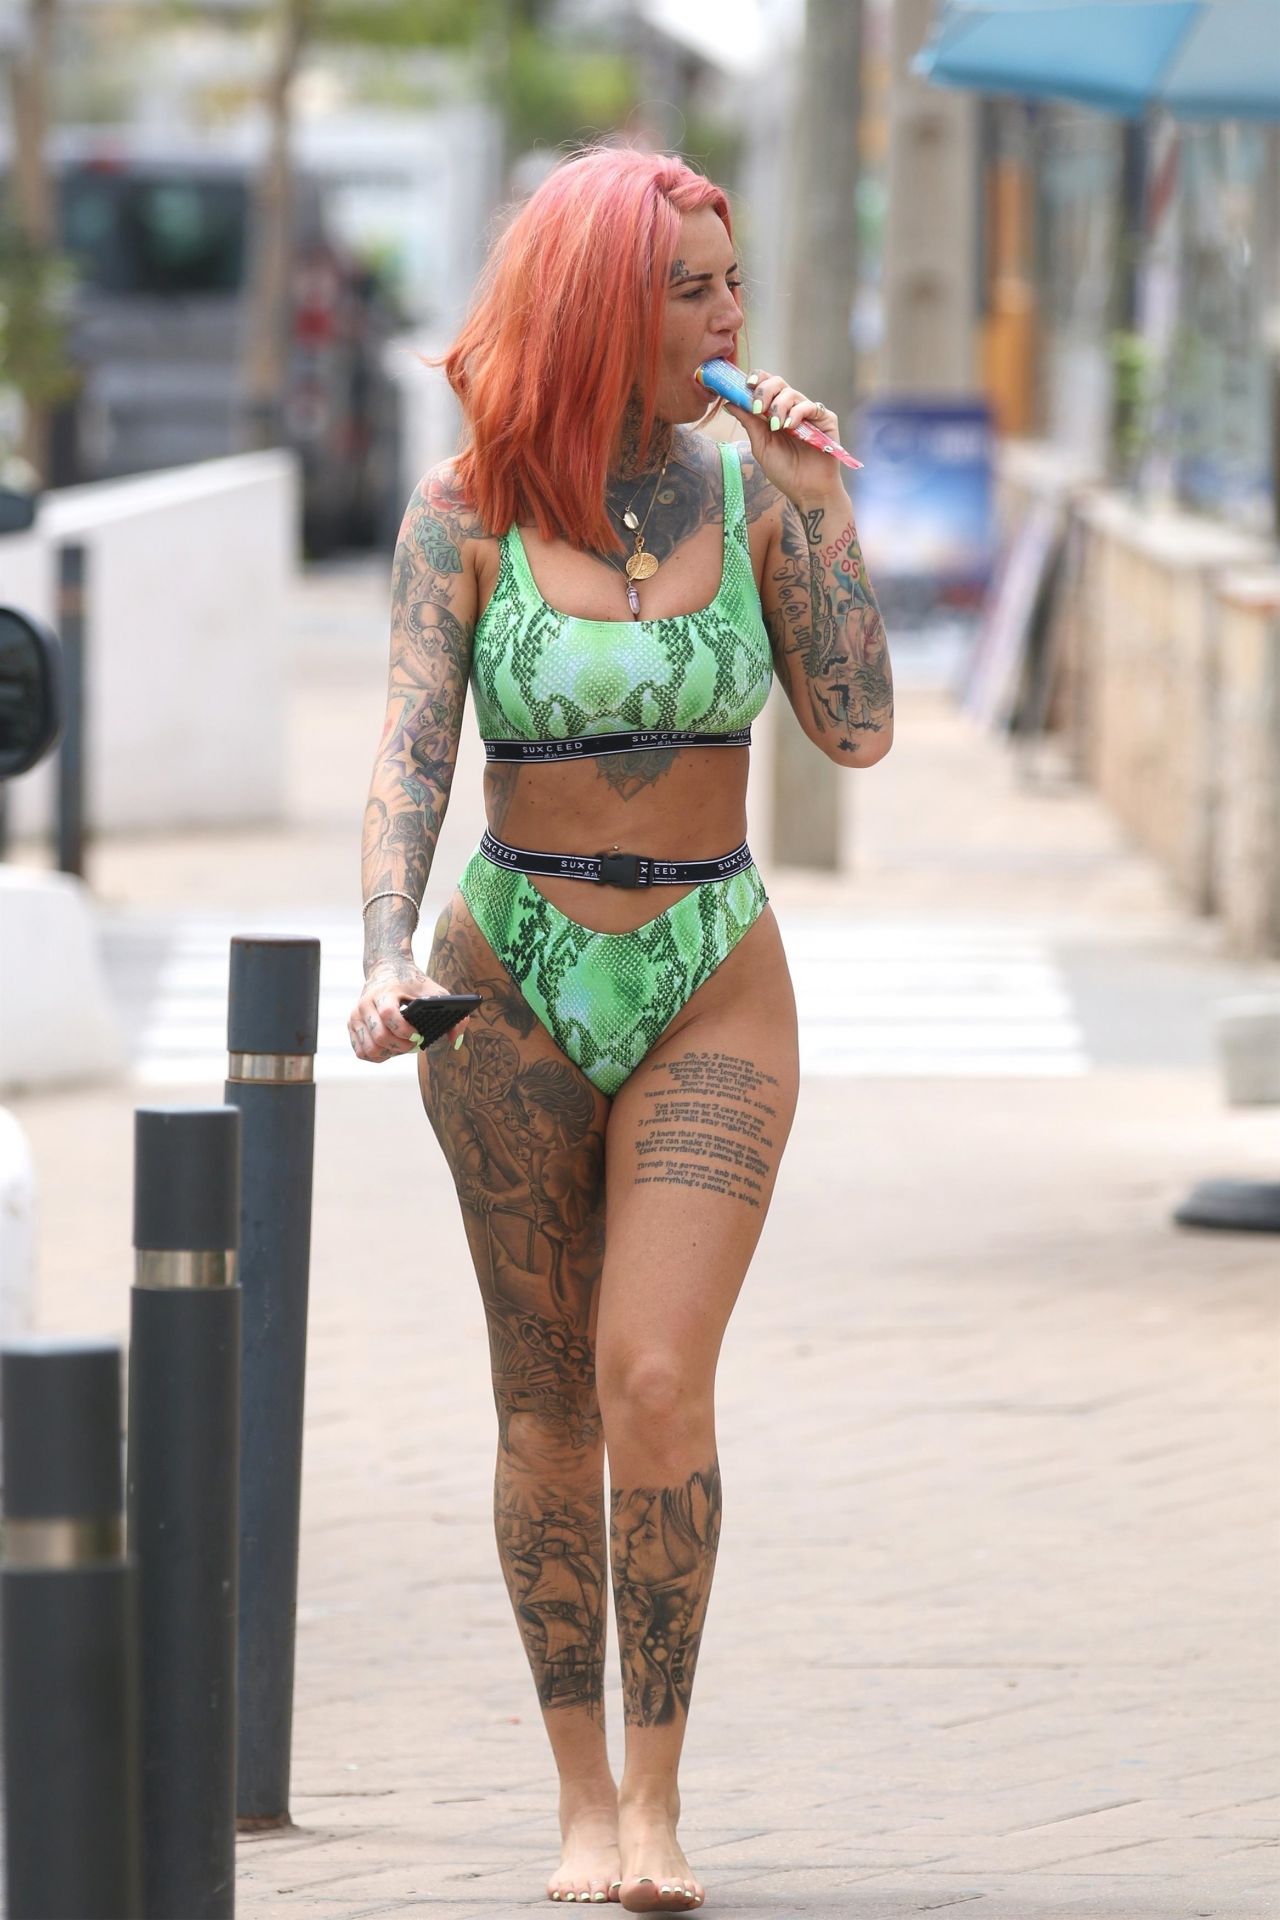 Who is jemma lucy